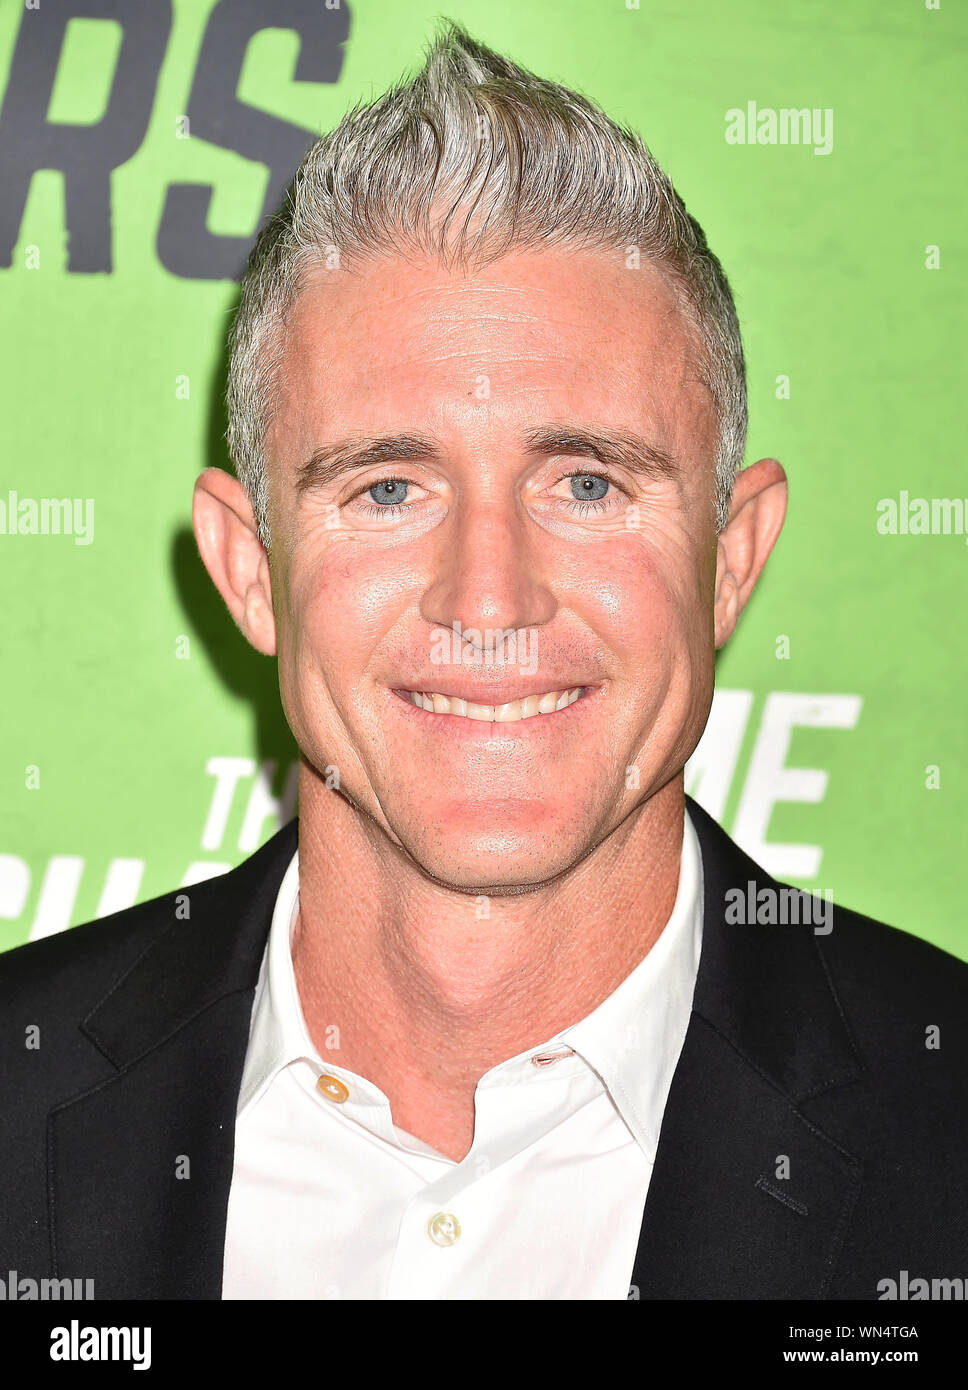 Chase utley hi-res stock photography and images - Alamy